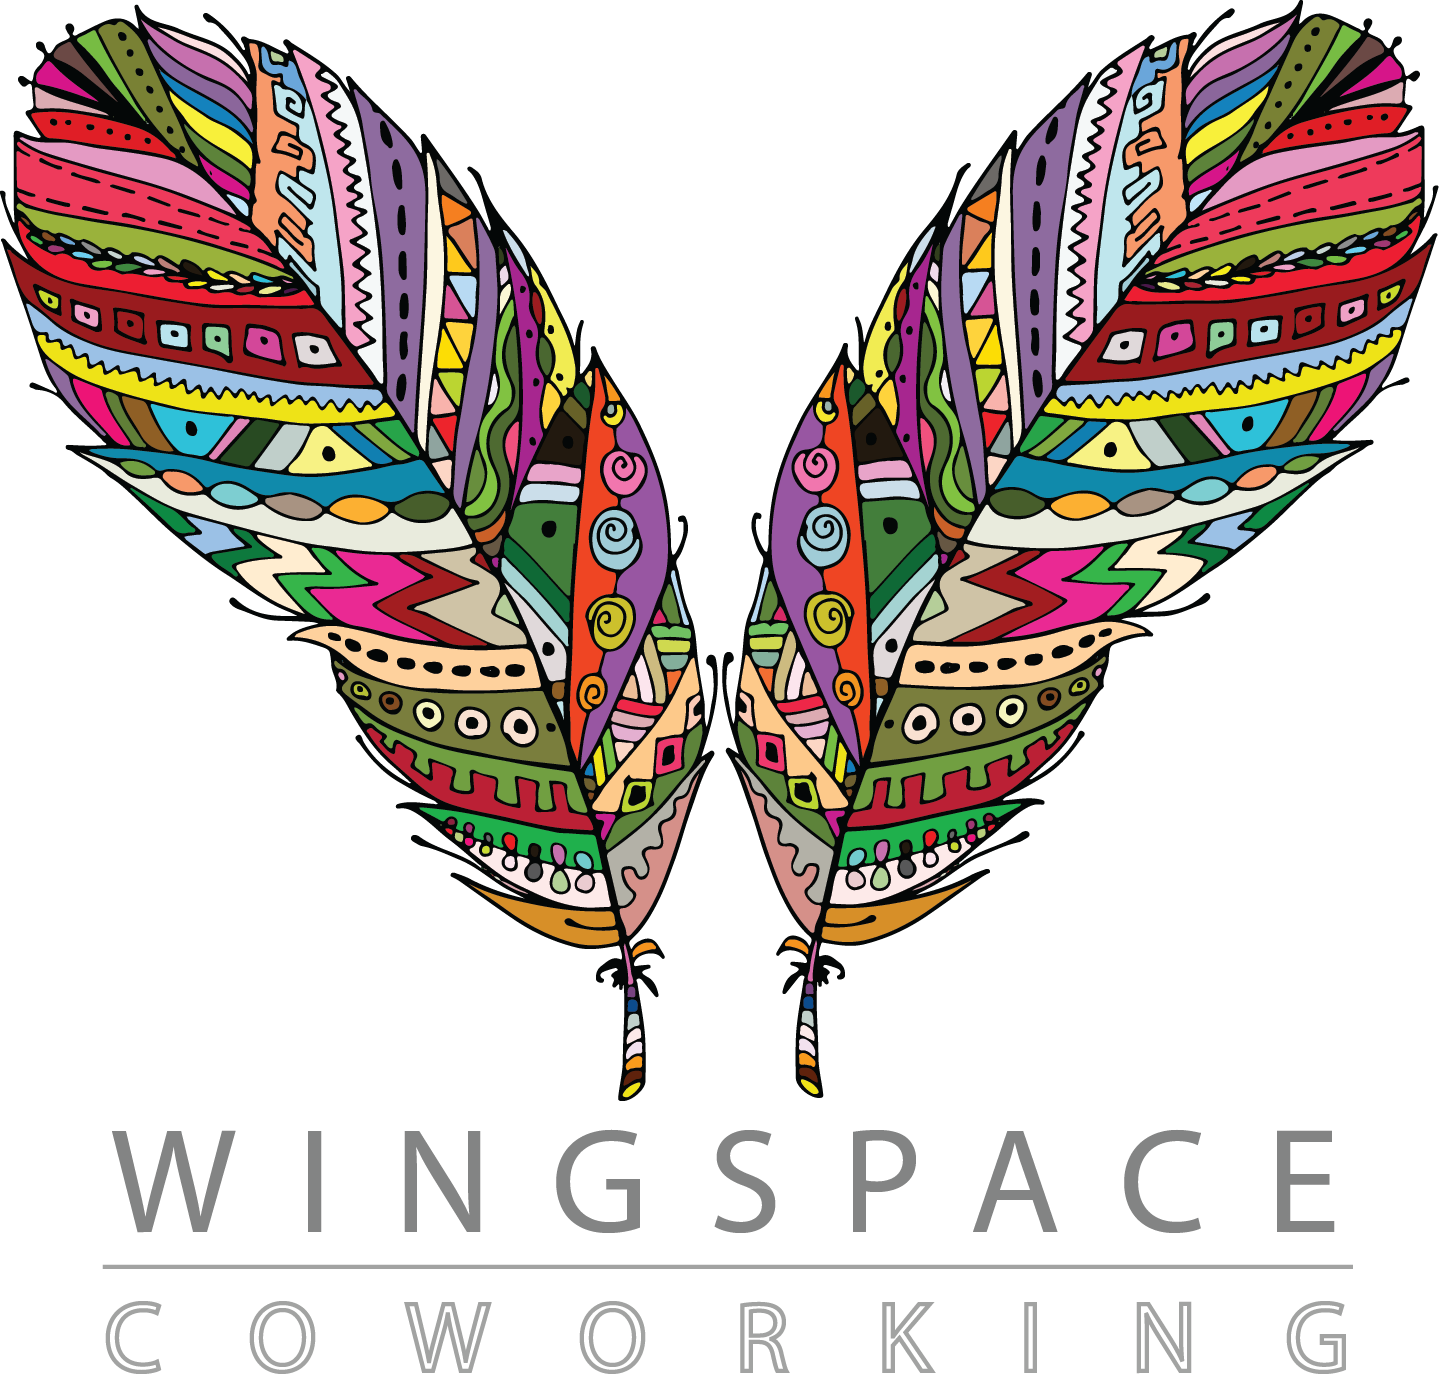 Wingspace co working